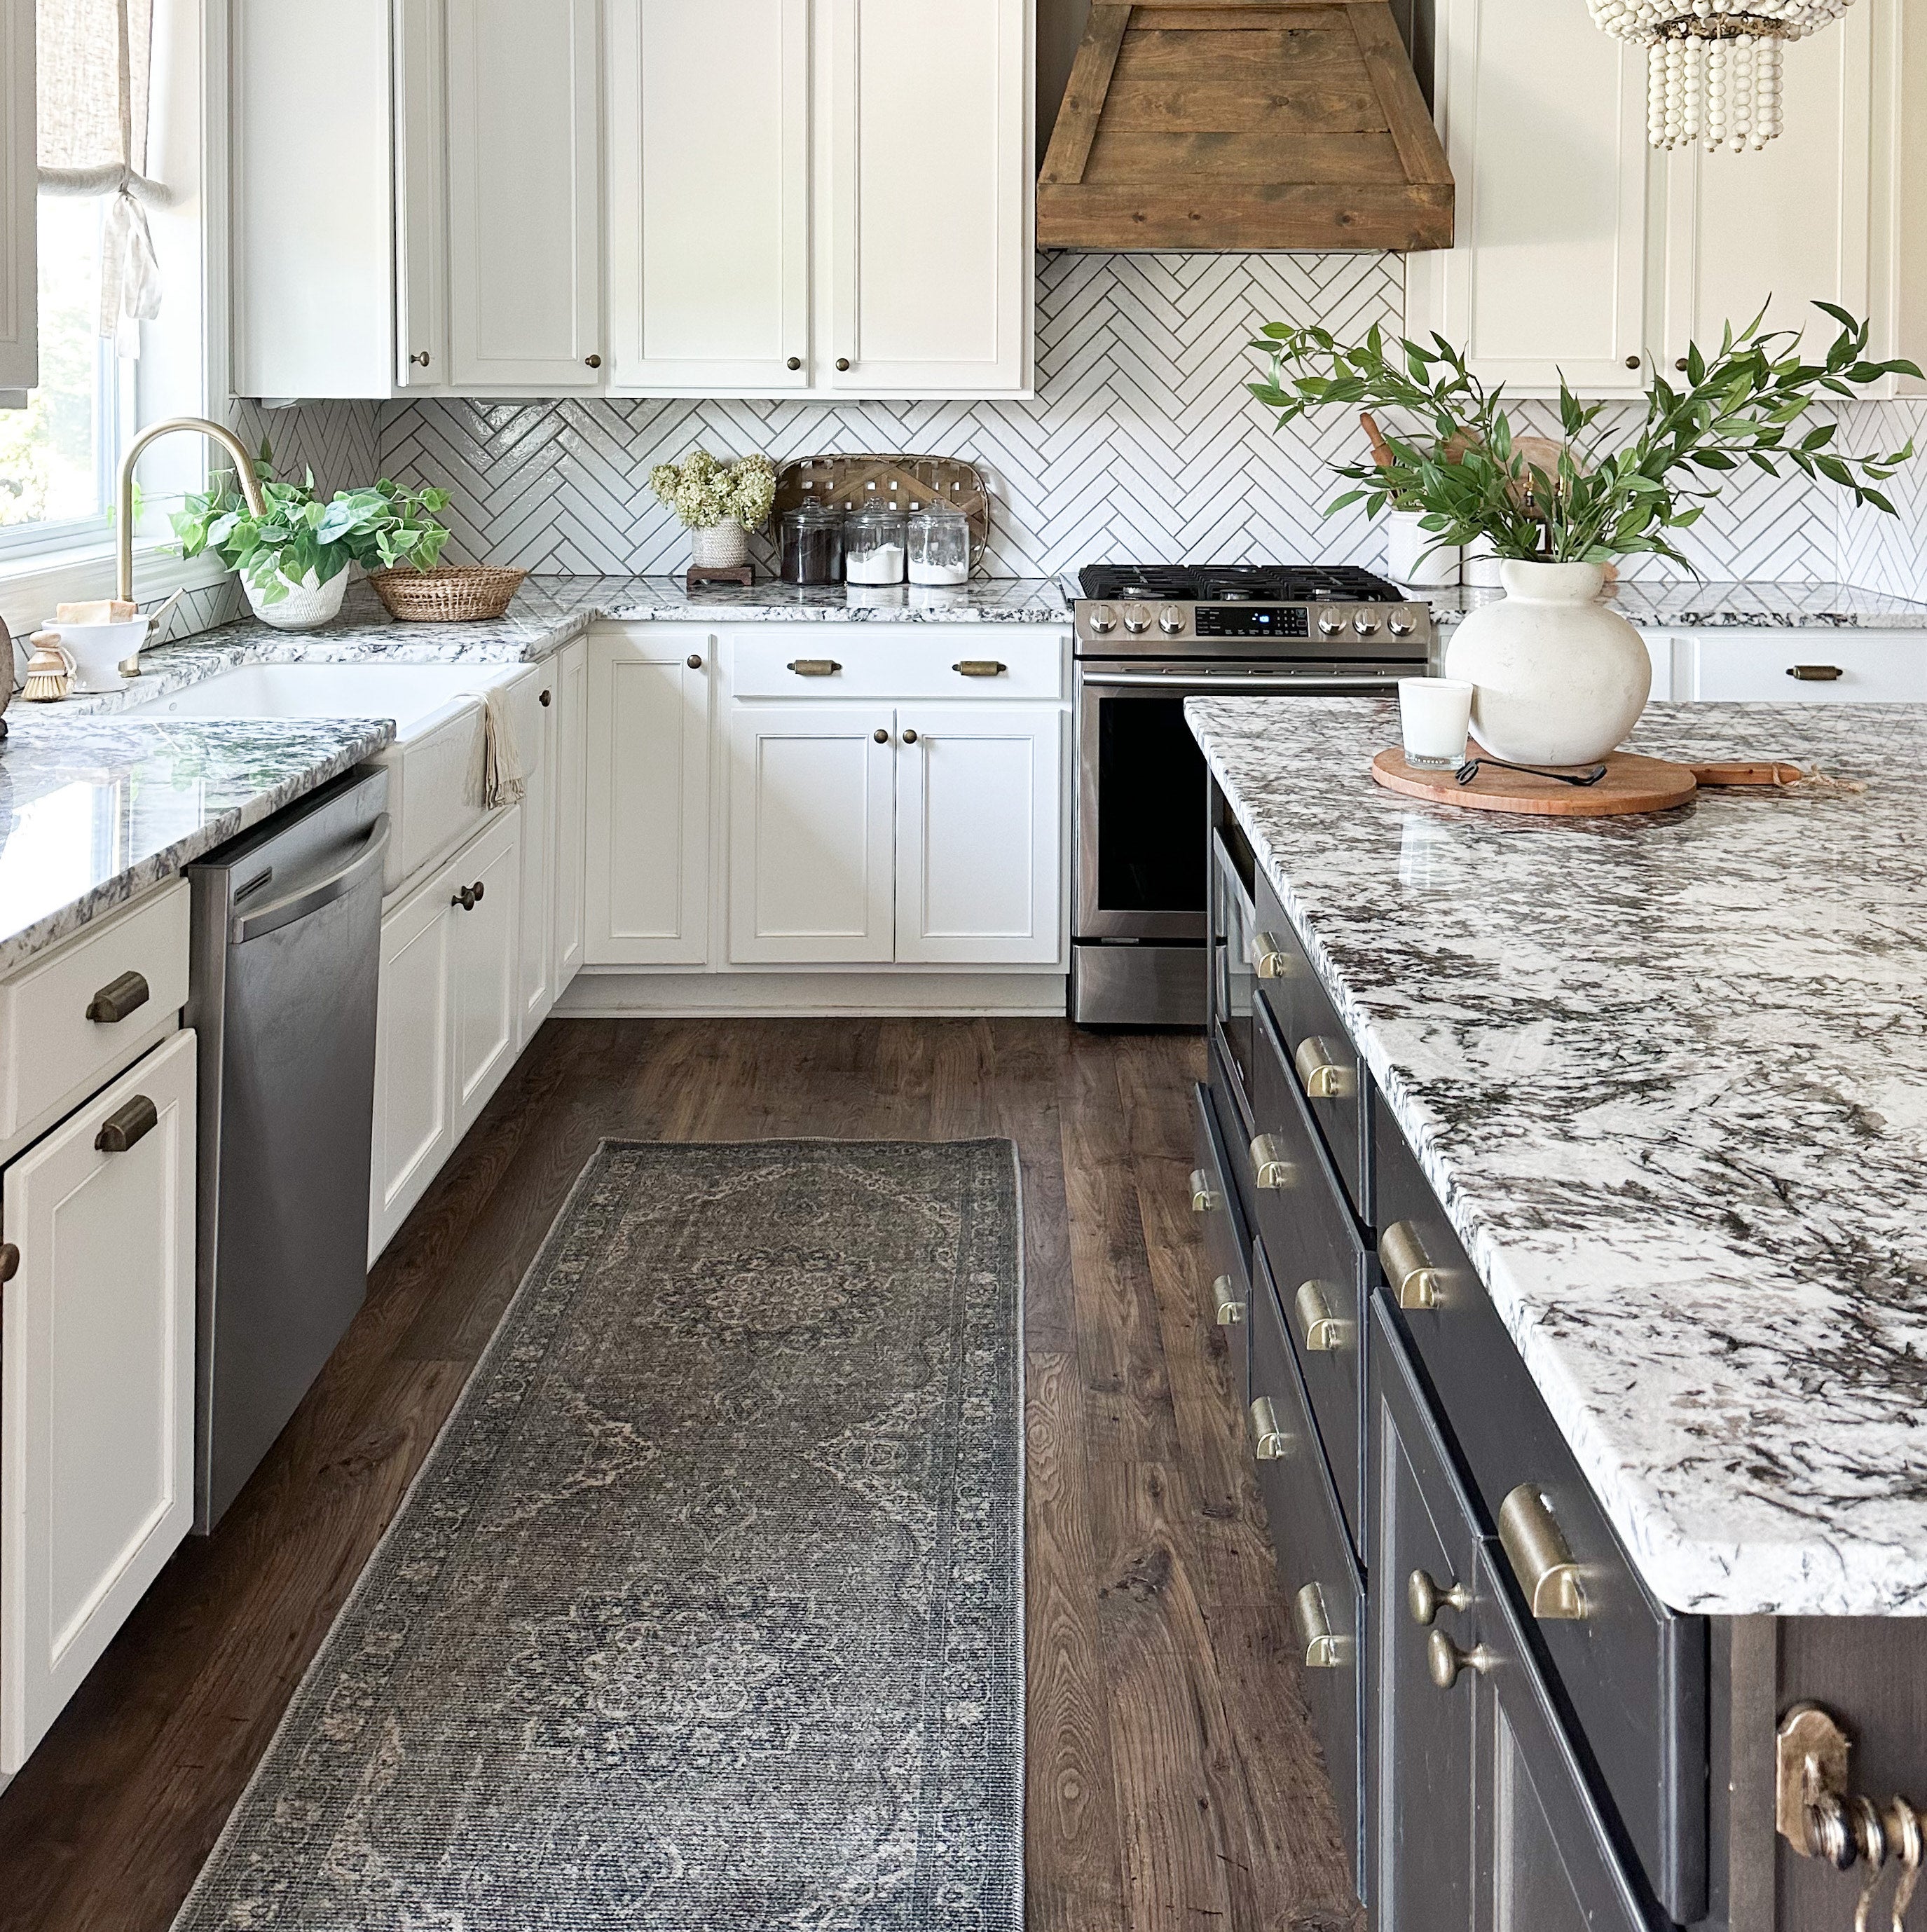 Enhance Your Galley Kitchen with Stylish Runner Rugs: A